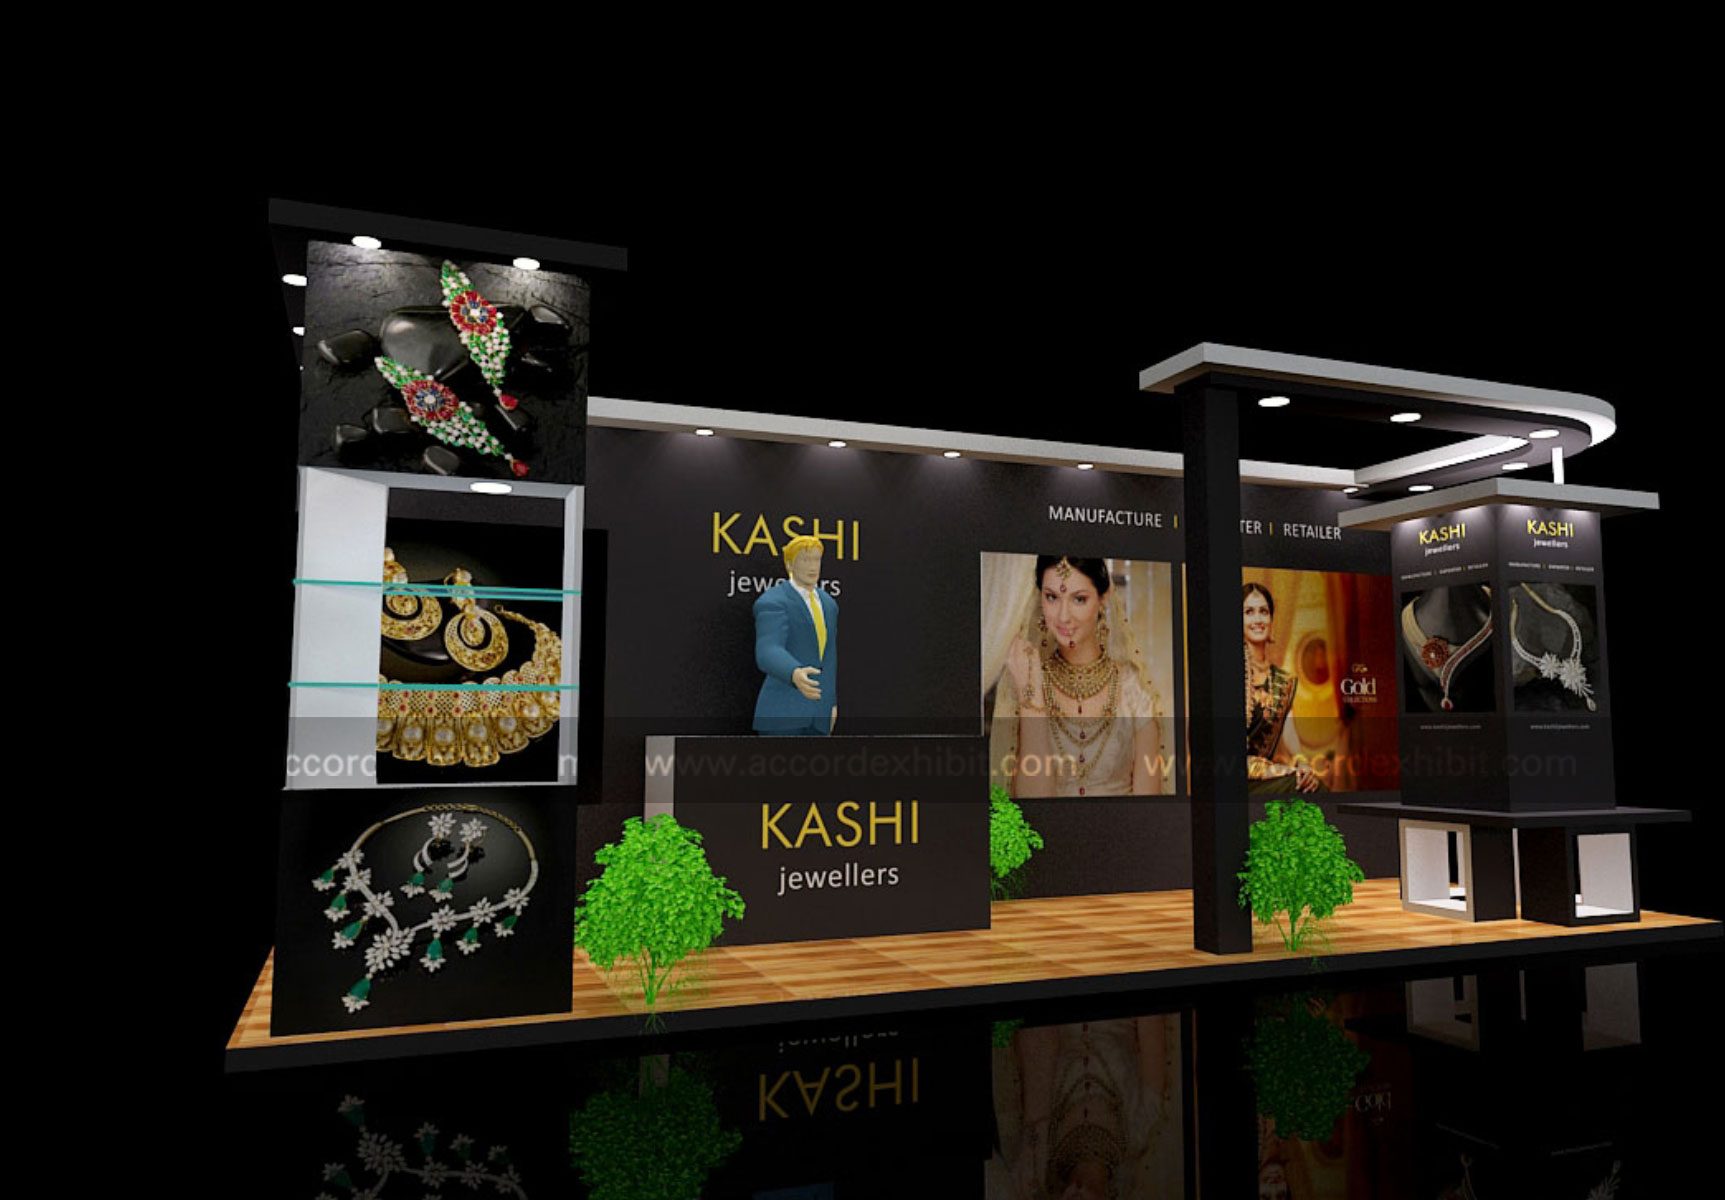 Exhibition Stall for Kashi Jewelers